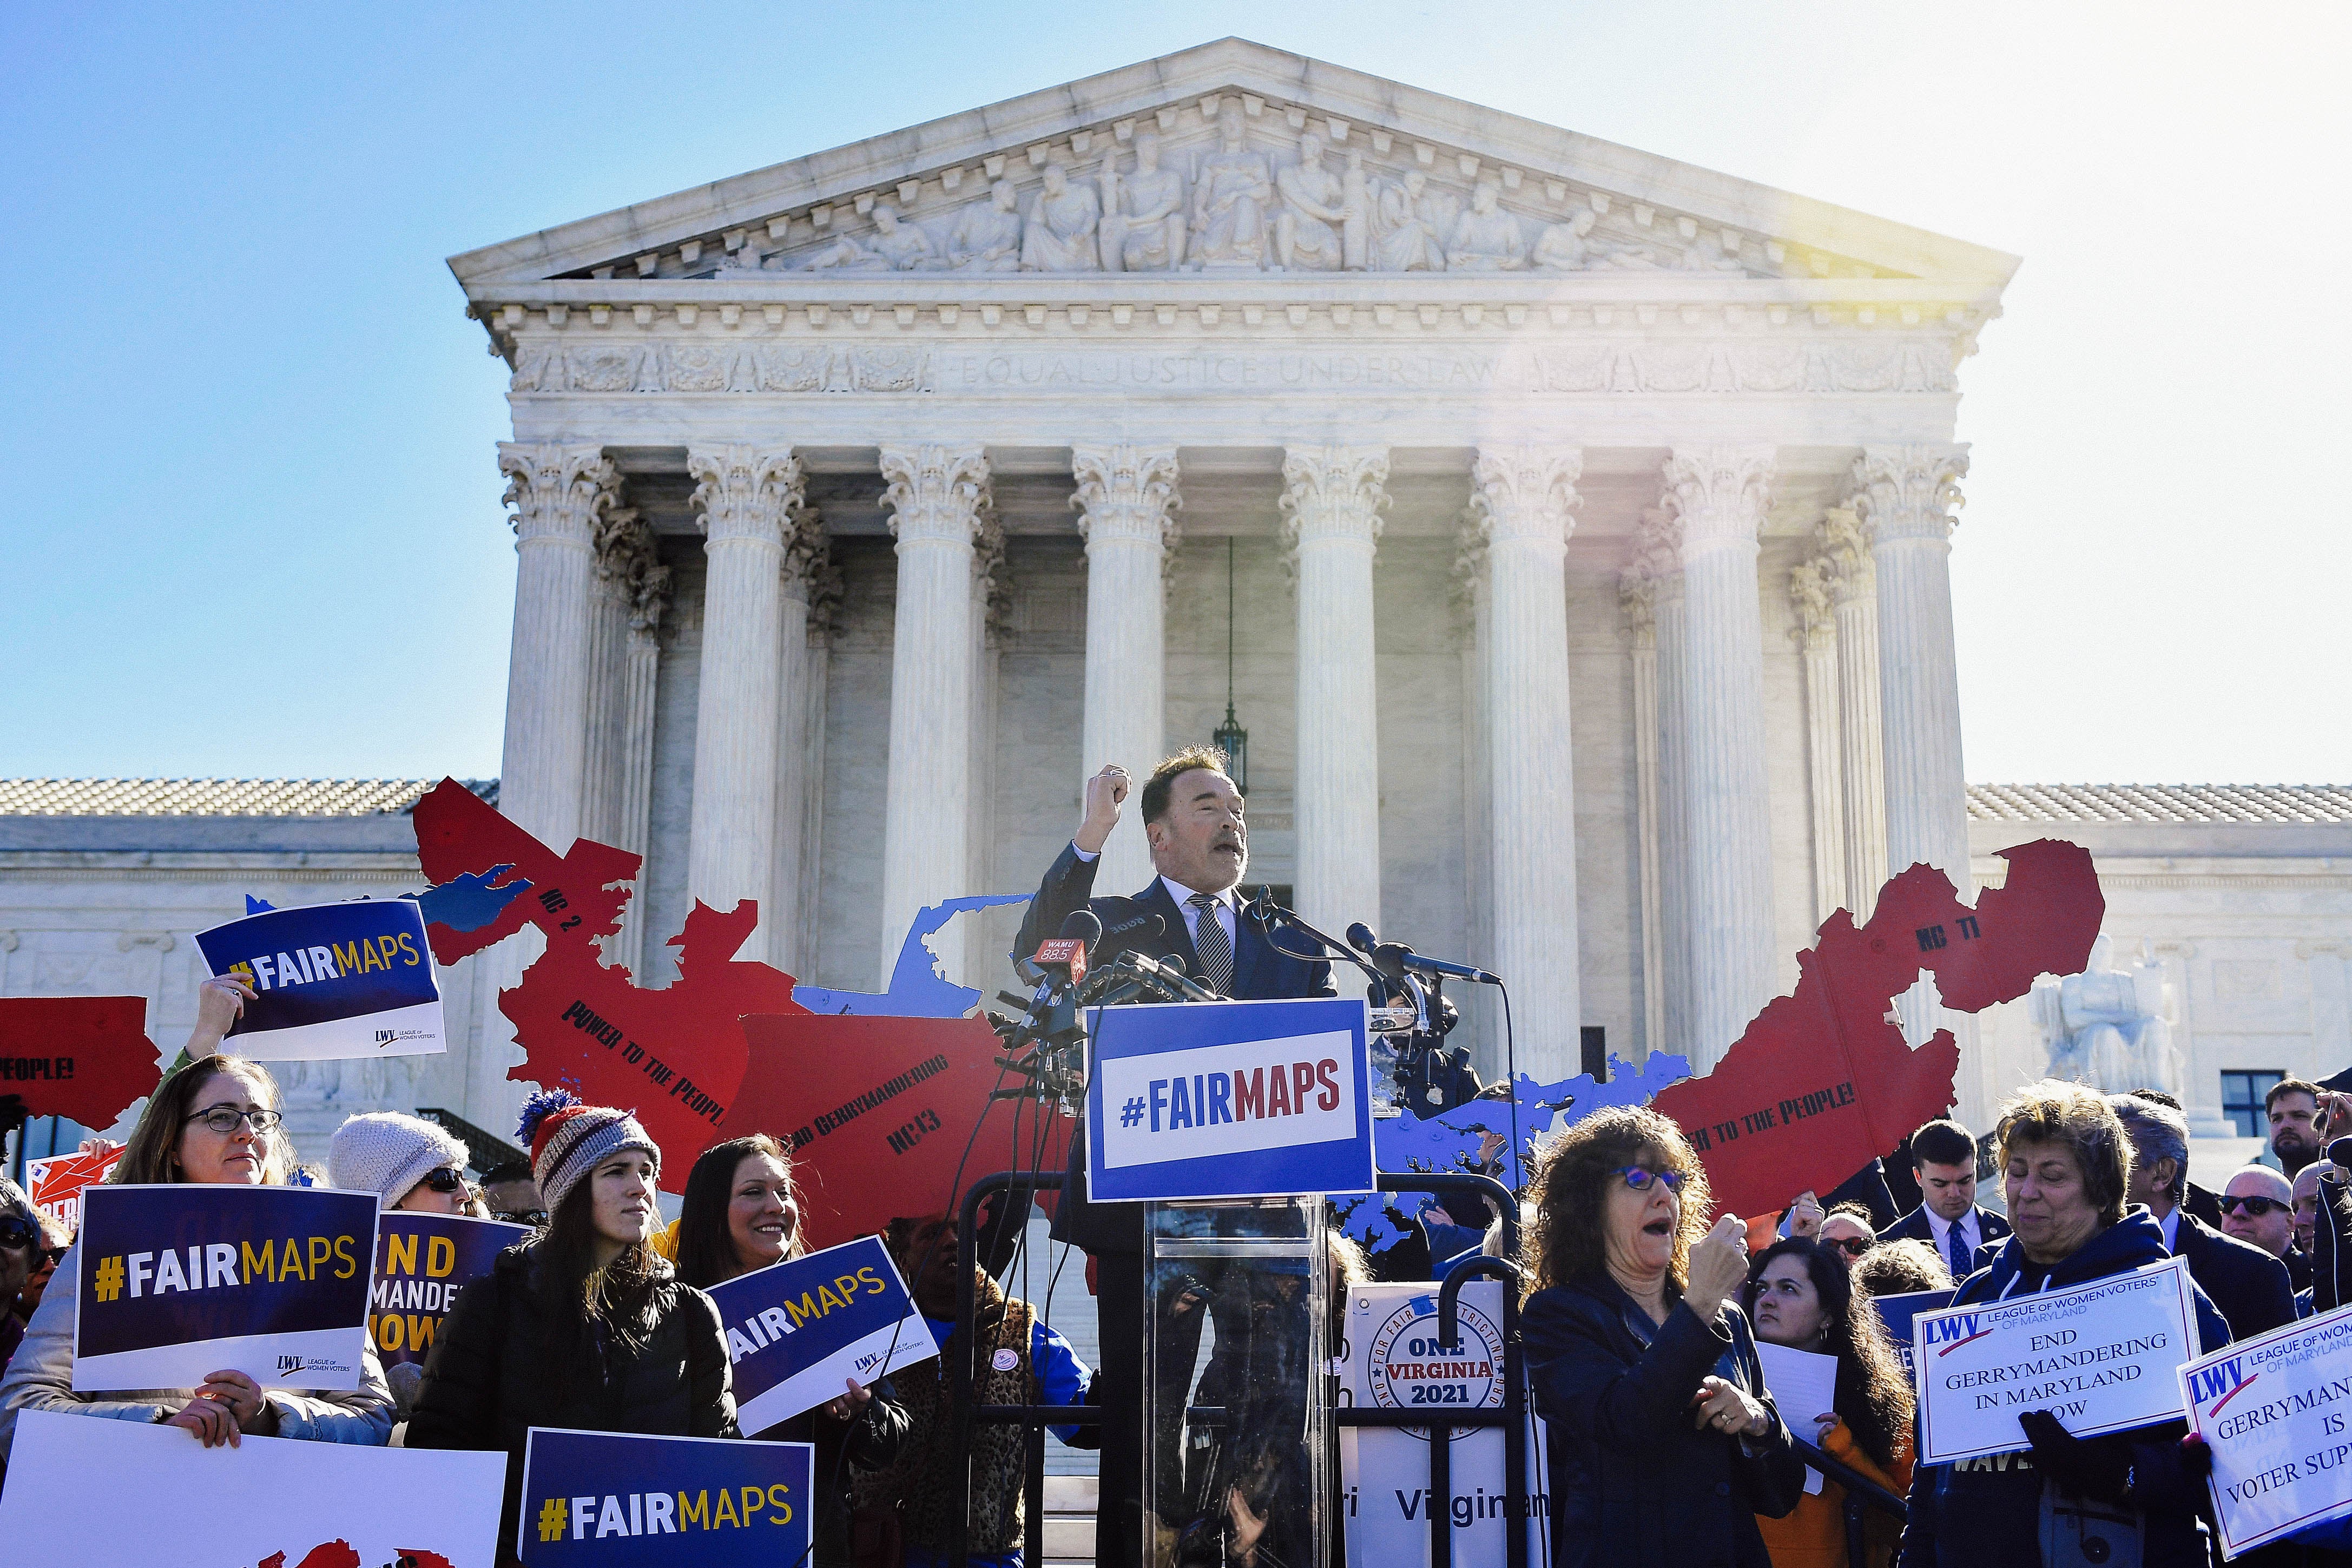 Schwarzenegger speaks at a podium in front of the Supreme Court building with a crowd around him.